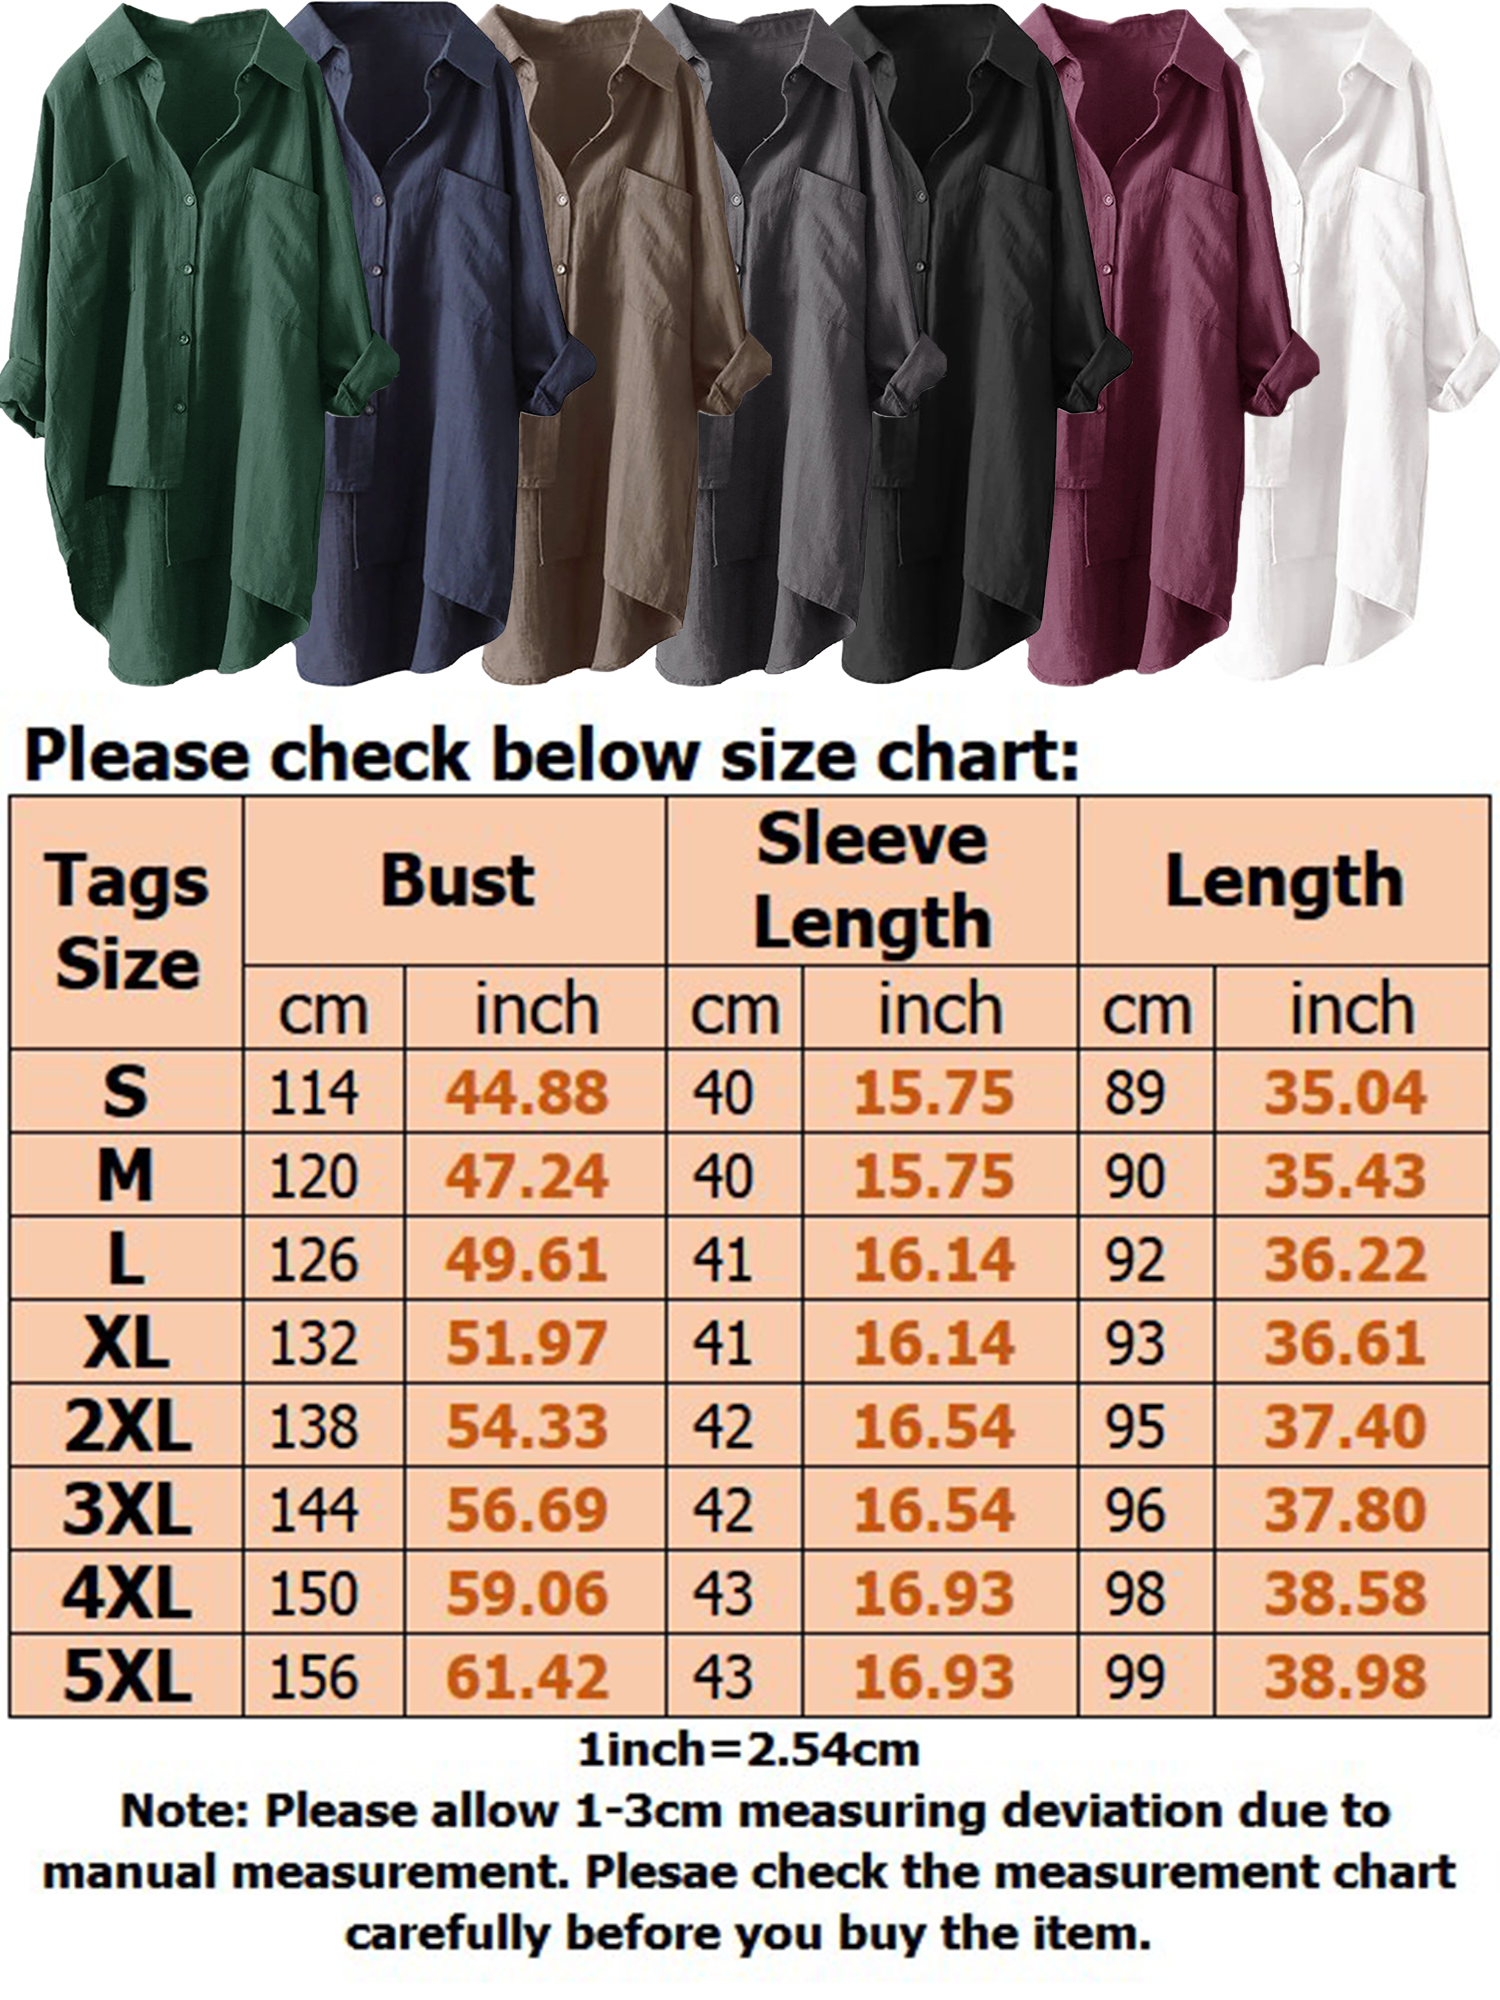 S-5XL Women Casual V Neck High Low Asymmetric Hem T Shirt Blouse Long Sleeve Button Down Boyfriend T Shirts Tops Long Sleeve Basic Tunic Blouse Tee Shirt With Pocket - image 2 of 2